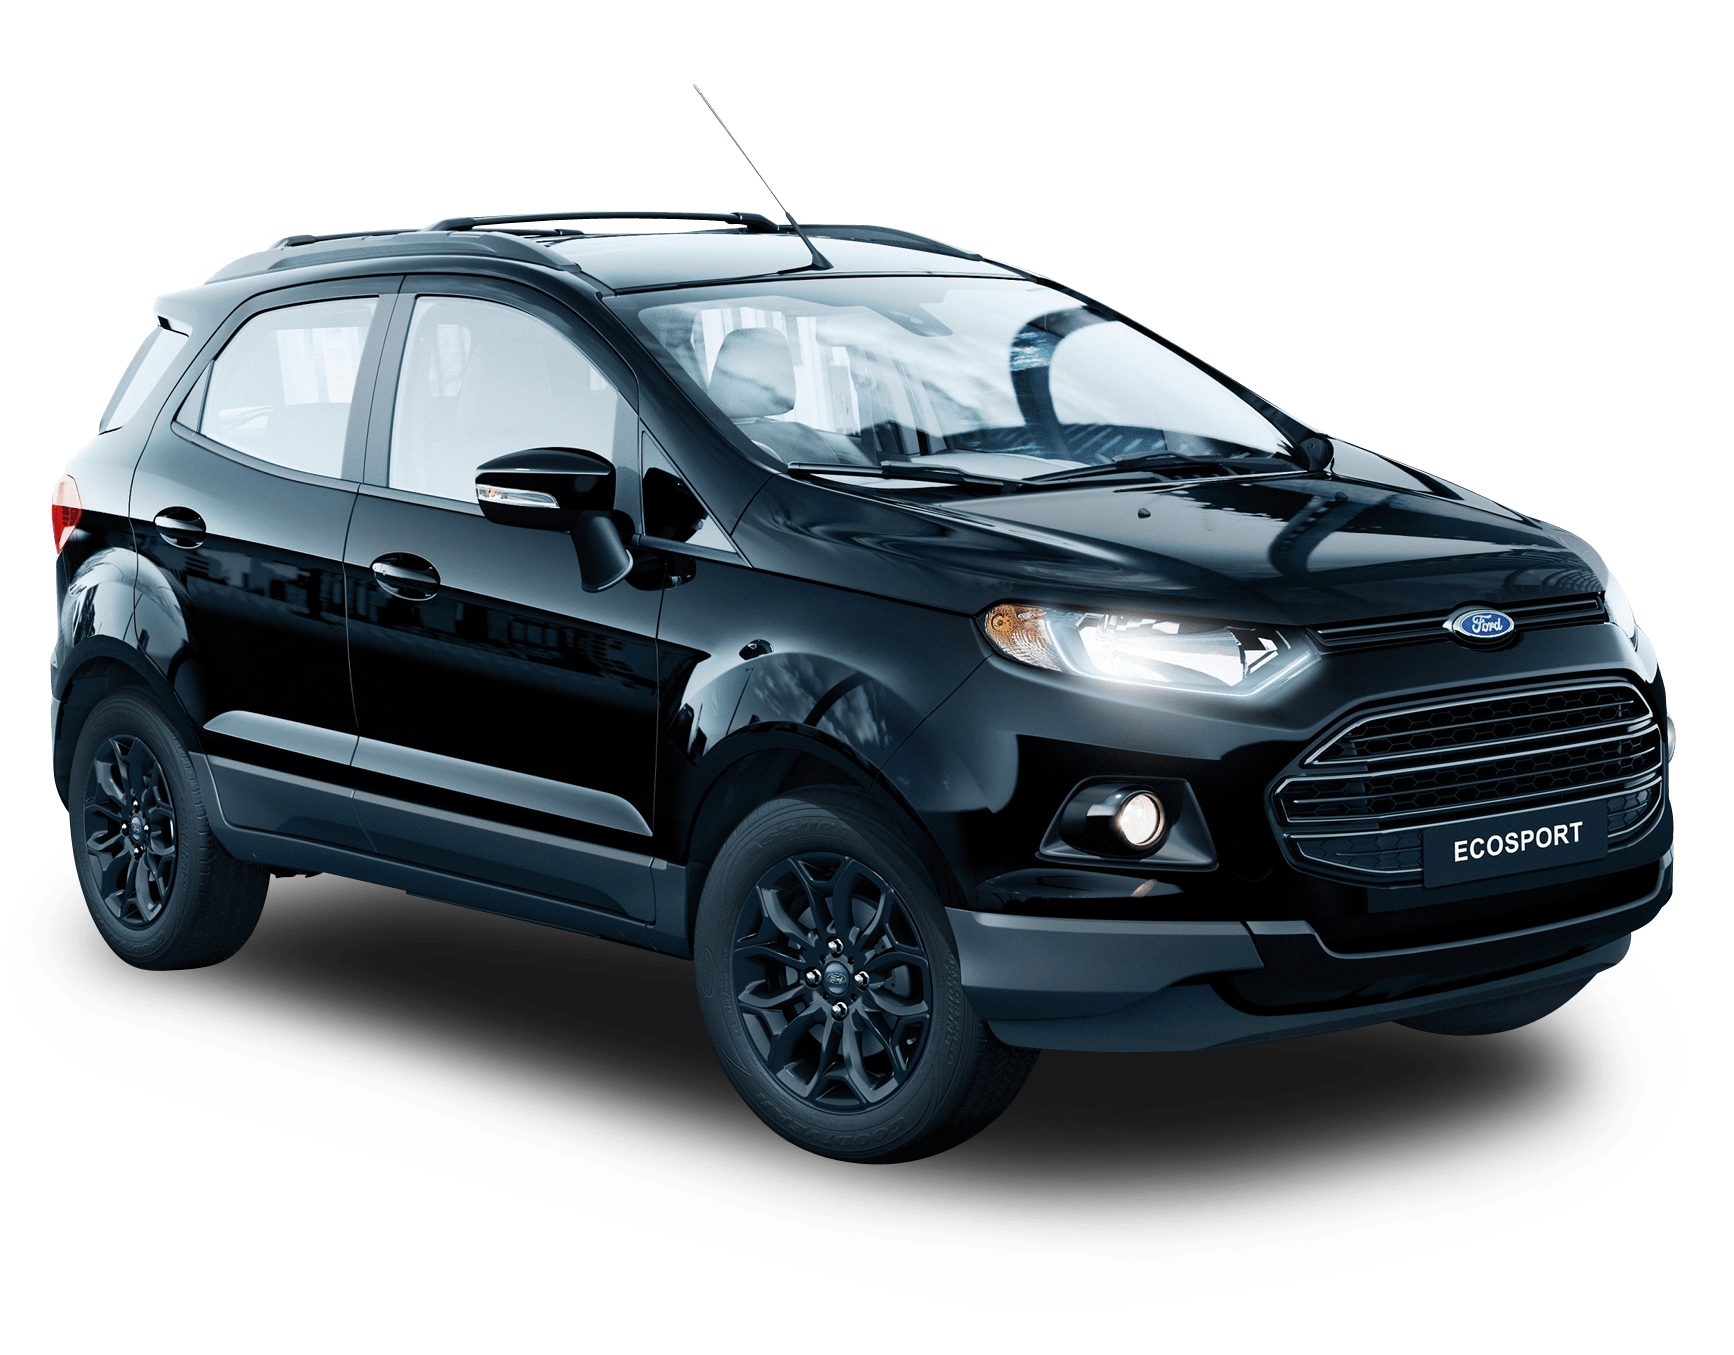 Ford Ecosport Review, For Sale, Colours, Models & Specs in Australia